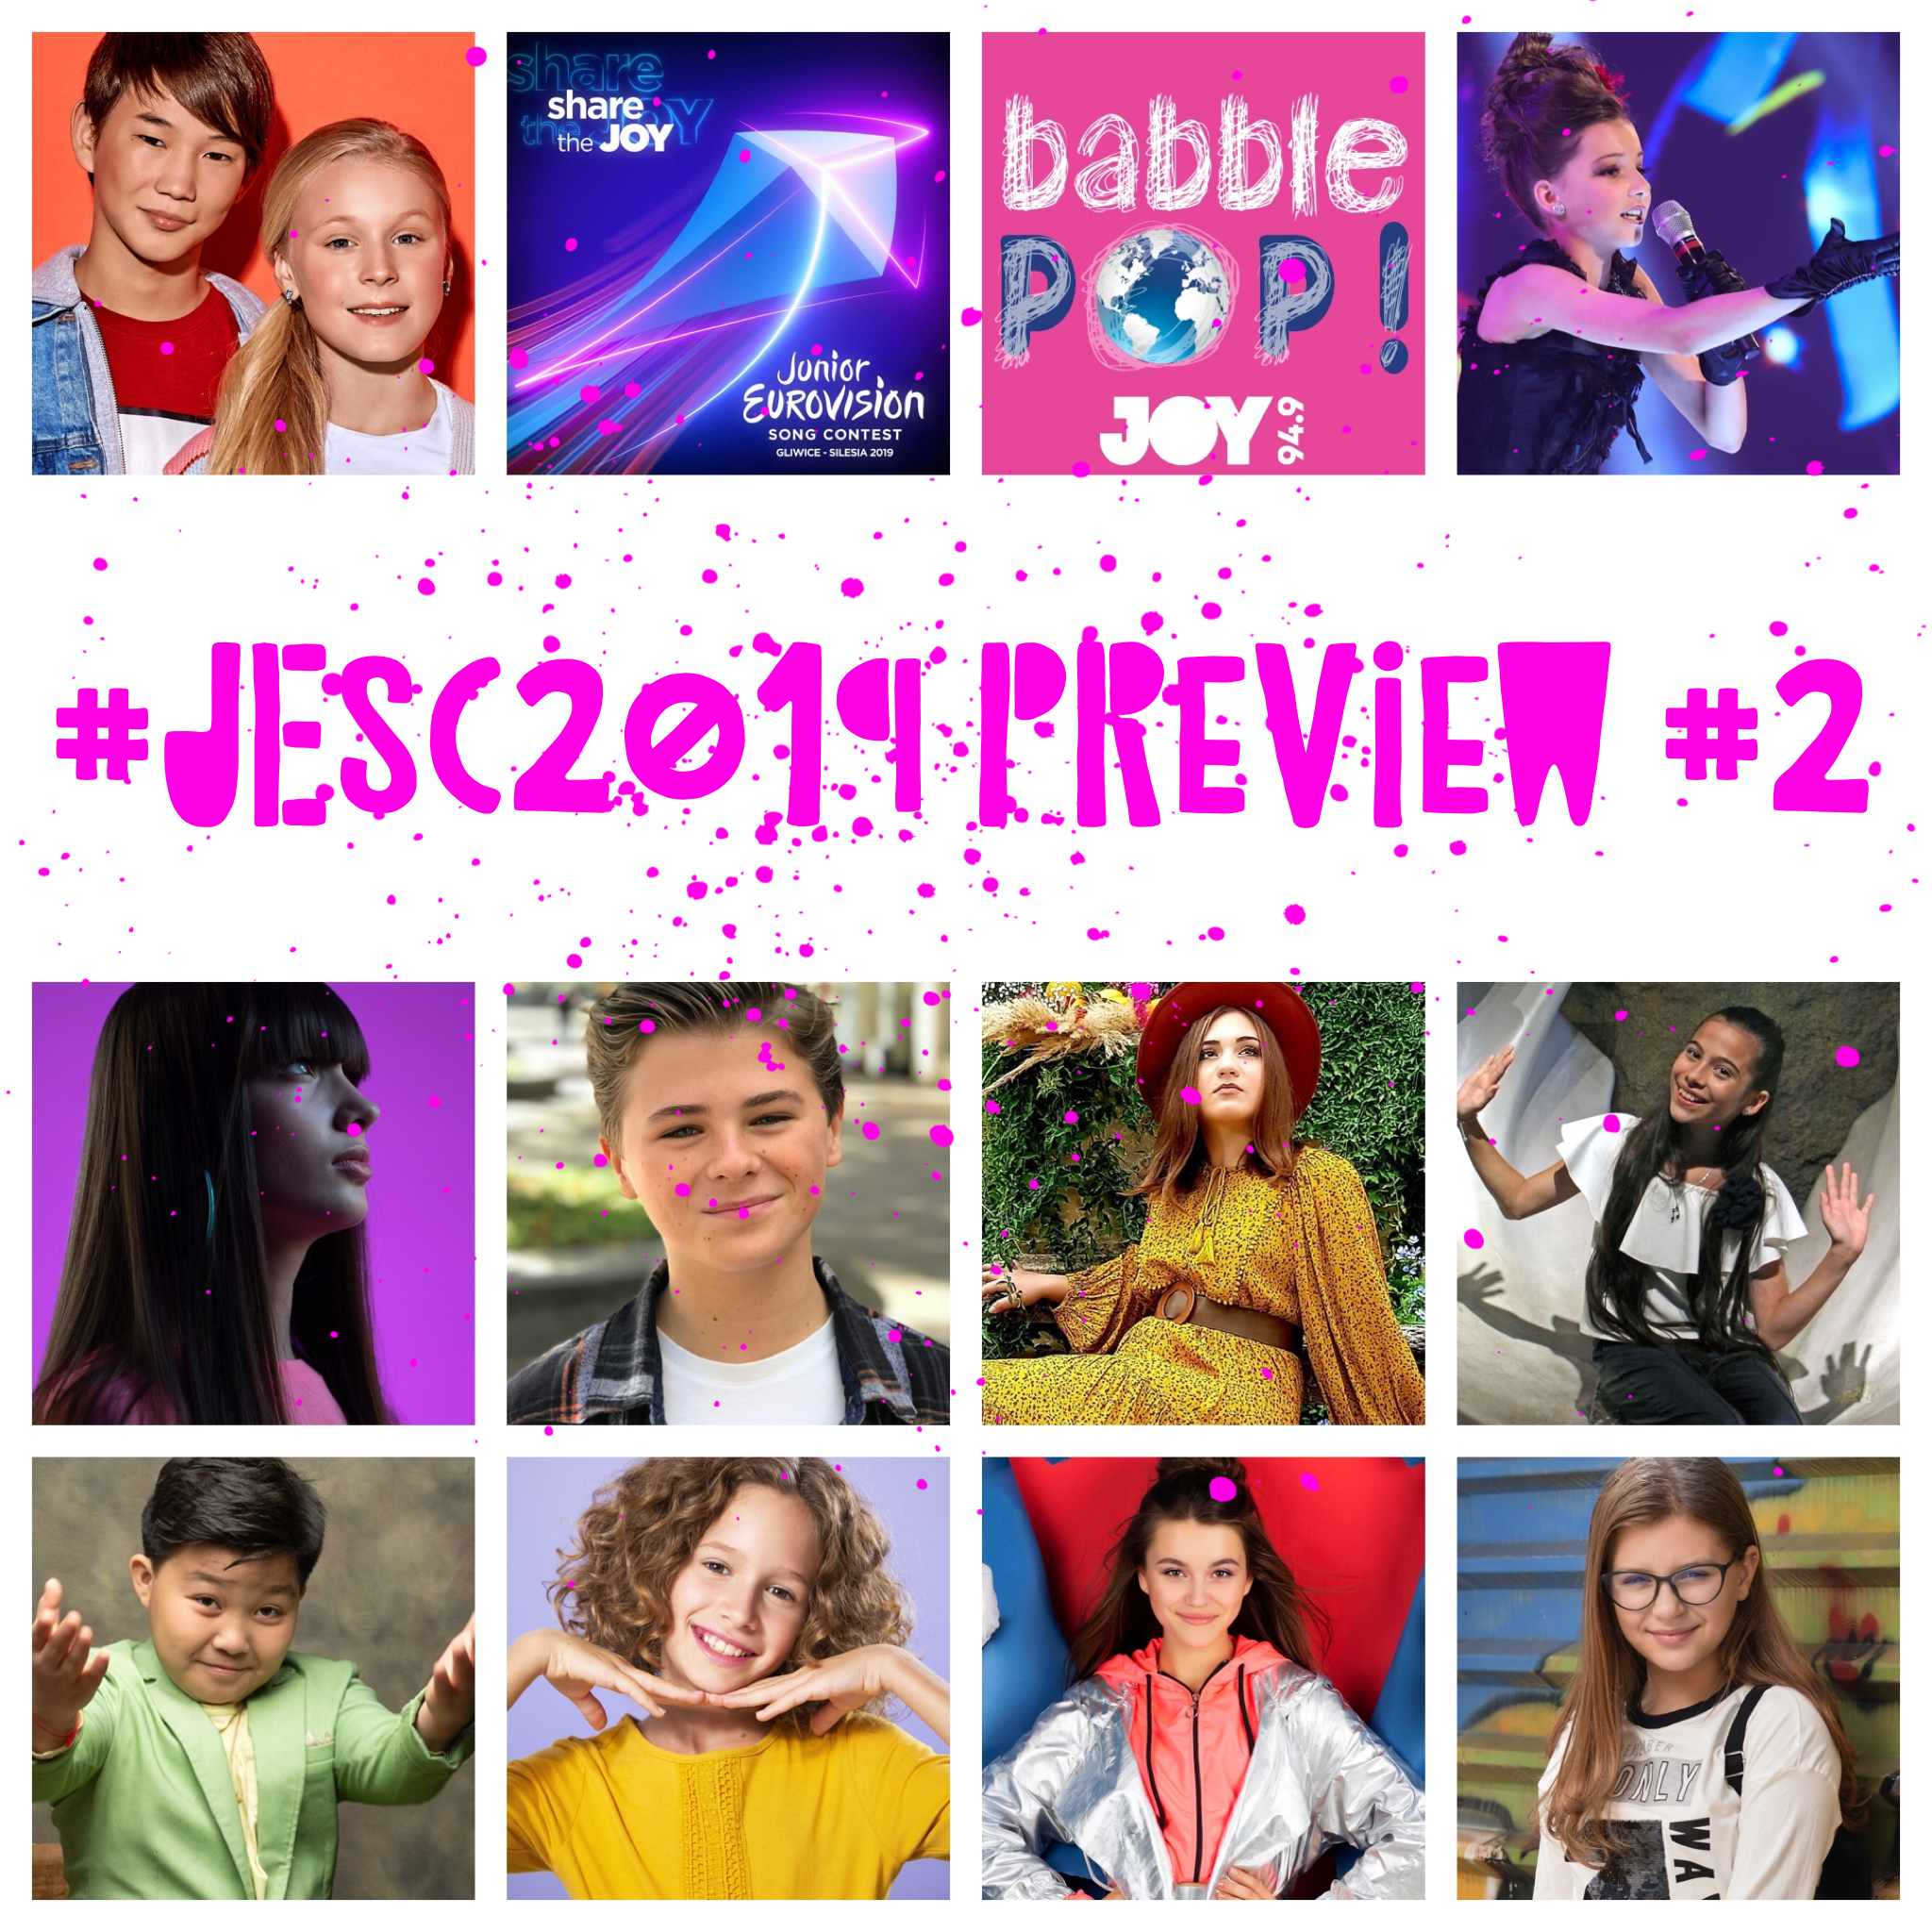 Two hundred and fifteen – Previewing Junior Eurovision 2019 (Part 2)